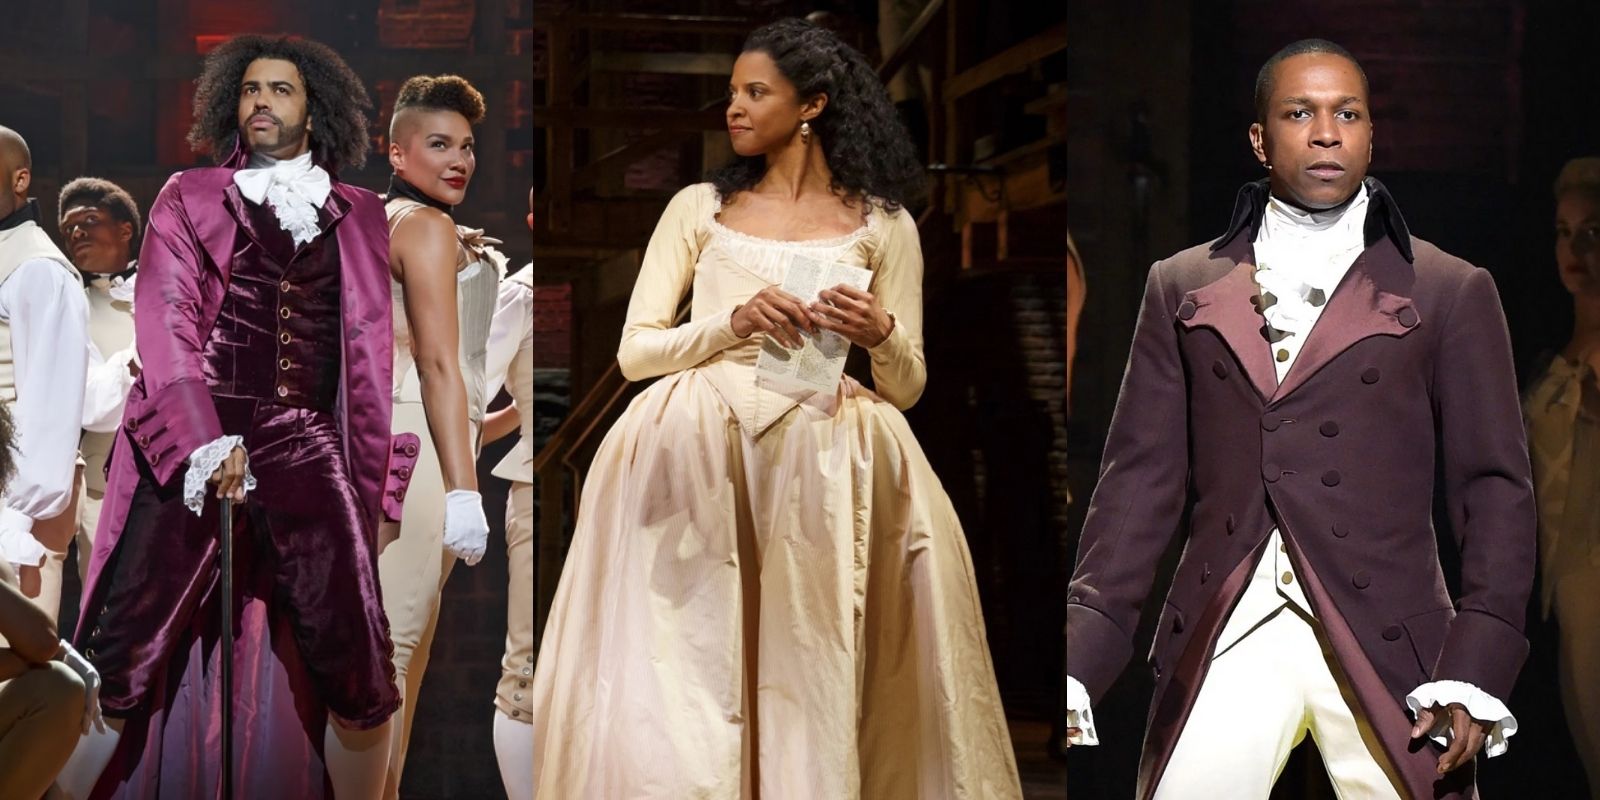 Hamilton One Quote From Each Character That Perfectly Sums Up Their Personality